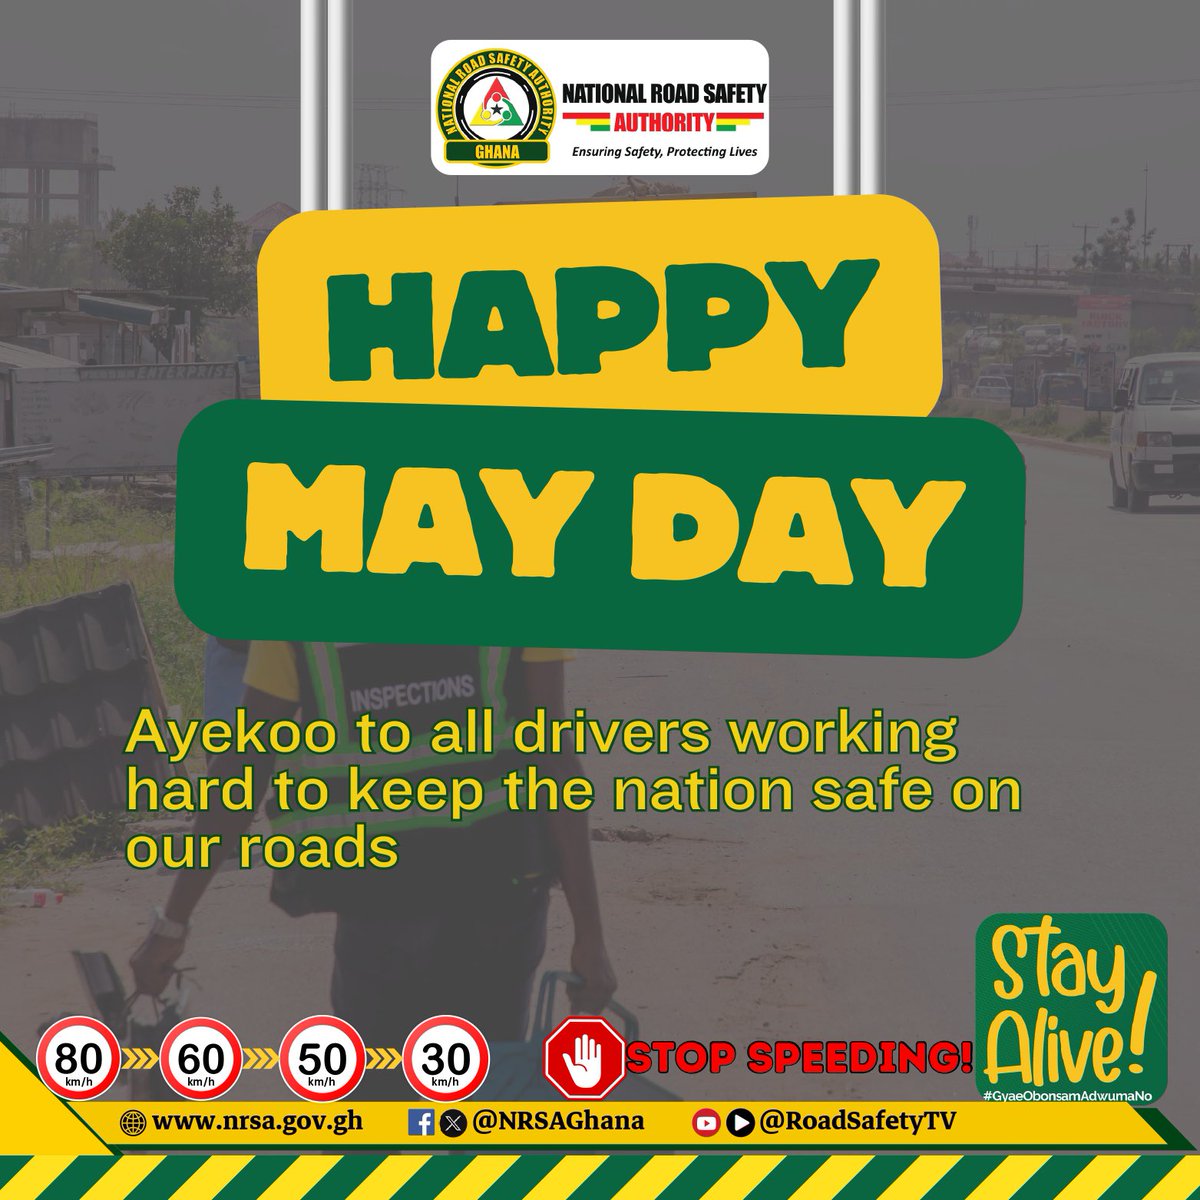 Happy May Day! #LabourDay #RoadSafety #StopSpeeding #StayAlive #EnsuringSafetyProtectingLives